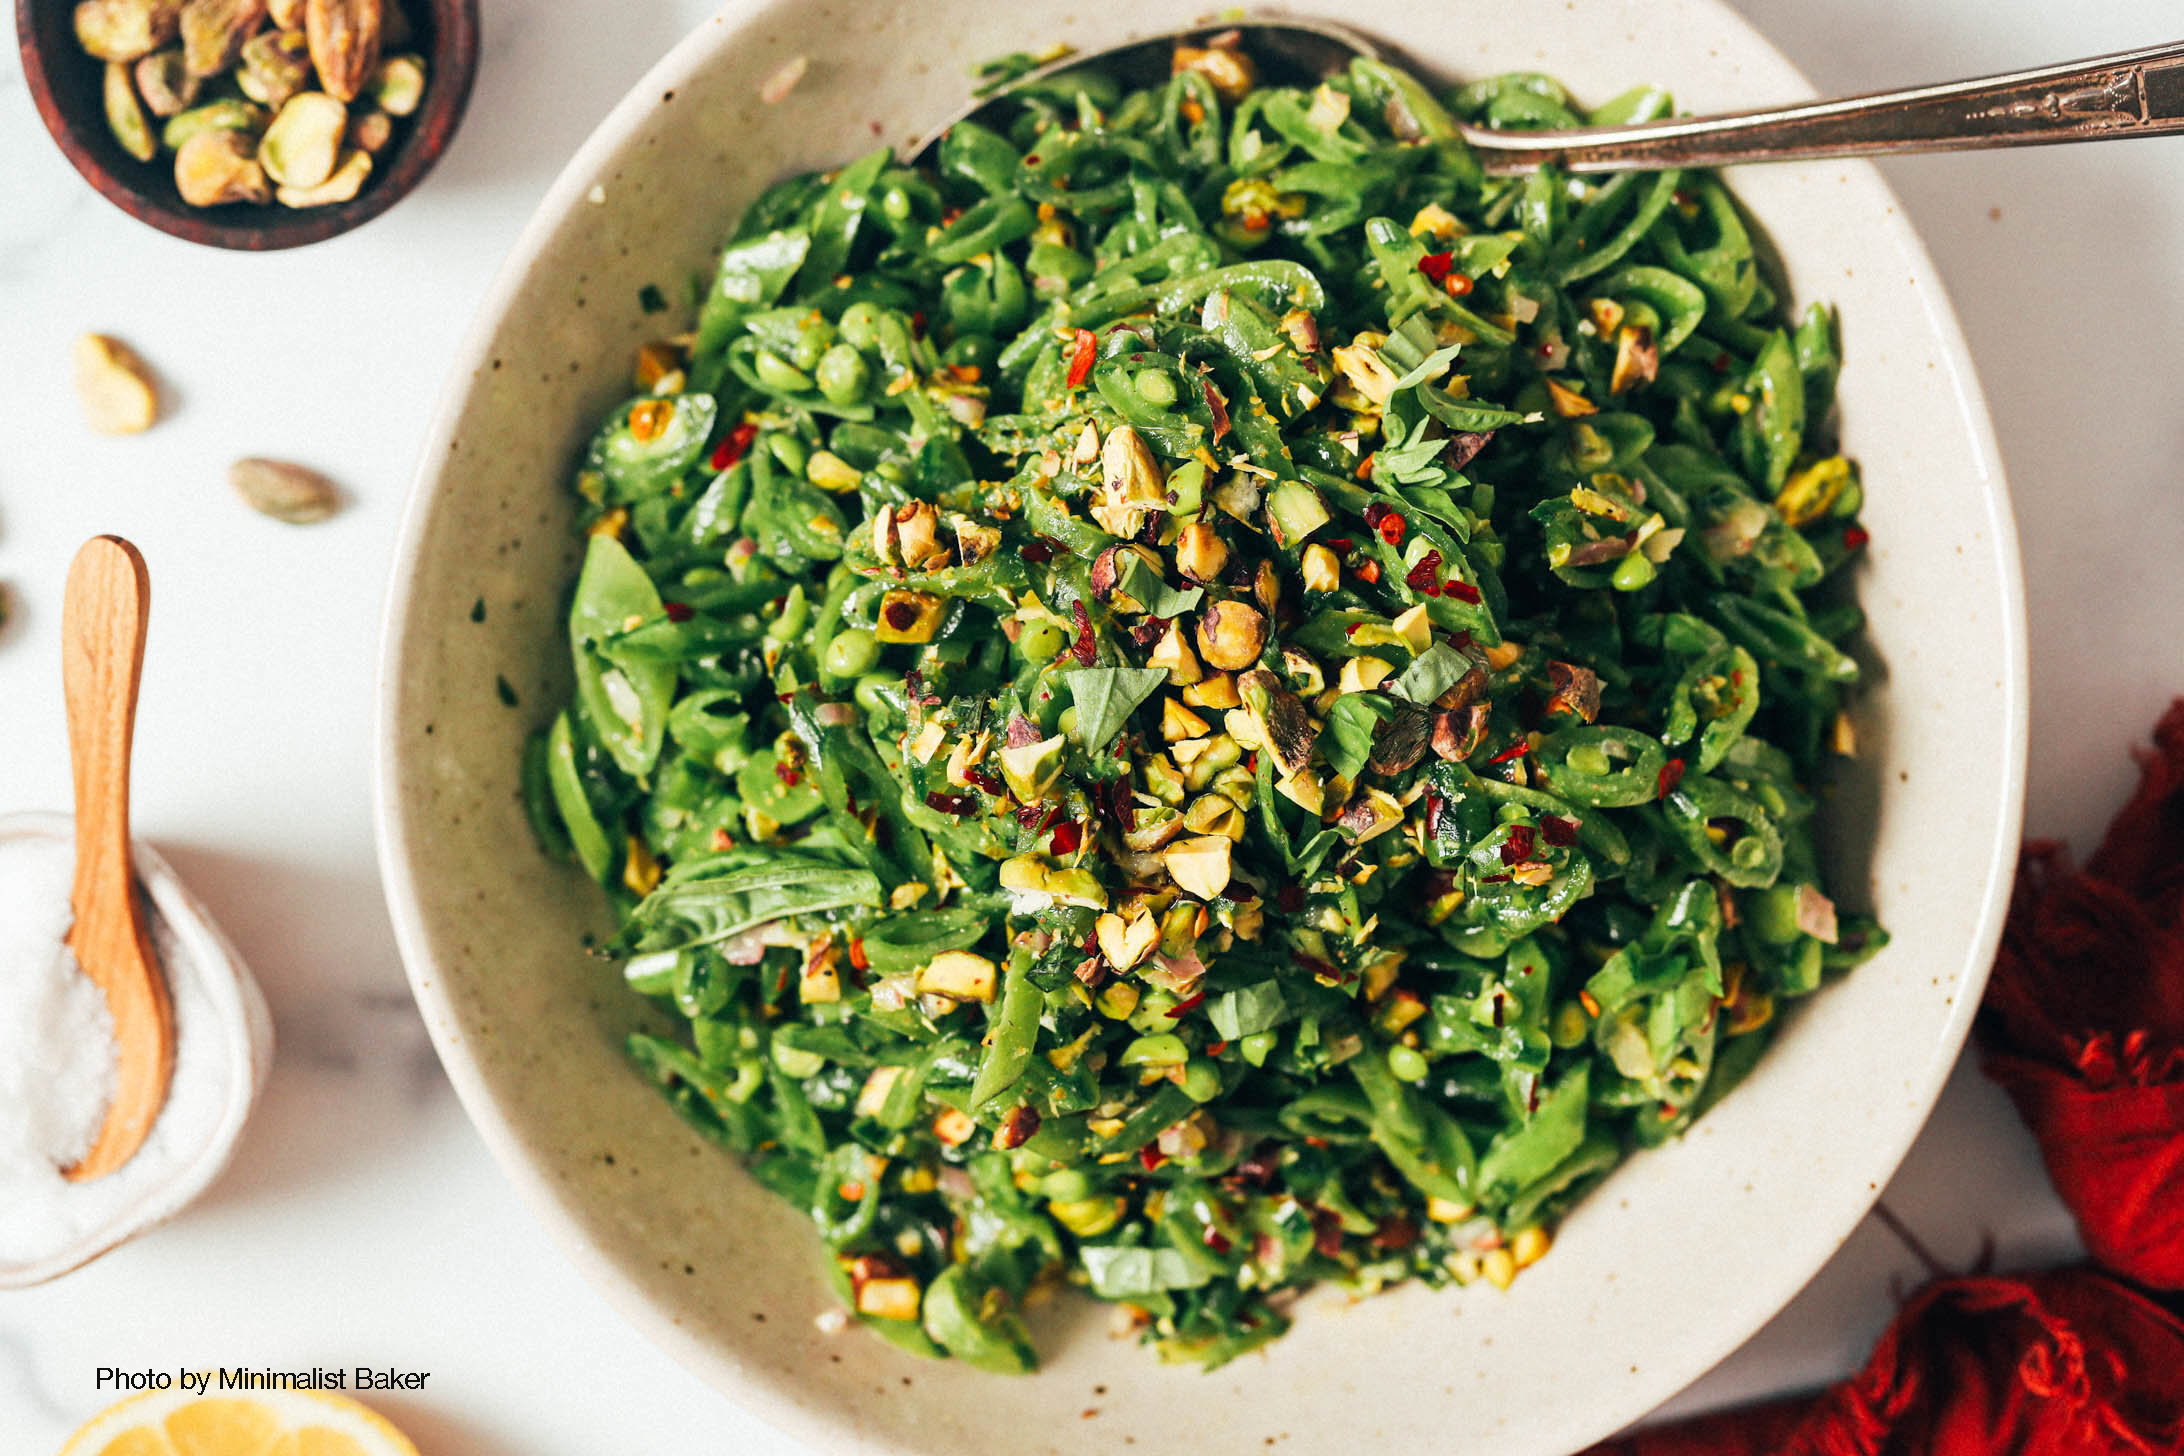 http://farmfluence.co/cdn/shop/articles/FRESH-Snap-Pea-Salad-with-Pistachios-10-ingredients-15-minutes-the-PERFECT-side-for-spring-minimalistbaker-recipe-plantbased-snappeas-9.png?v=1682388648